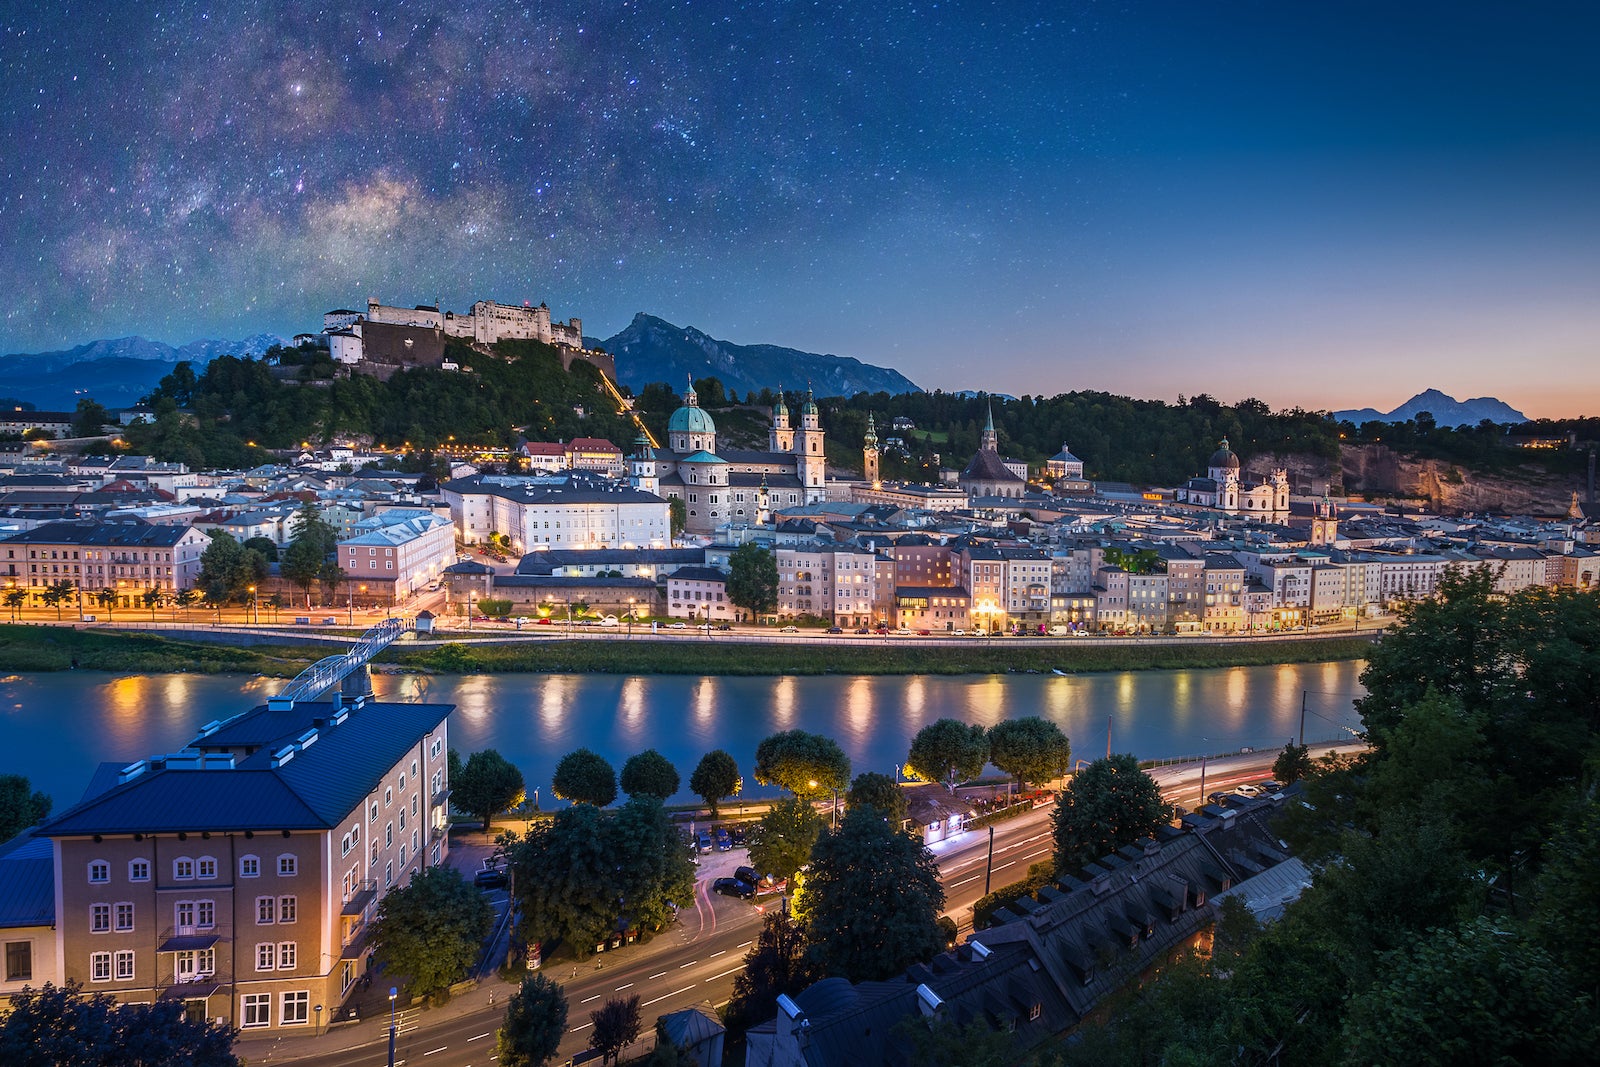 View of cityscape of Salzburg Cathedral, Fortress Hohensalzburg, and old castle in center of old town with river and road along the river at sunset time with milky way in Salzburg, Austria, Europe and also view of snow on alps mountain in background